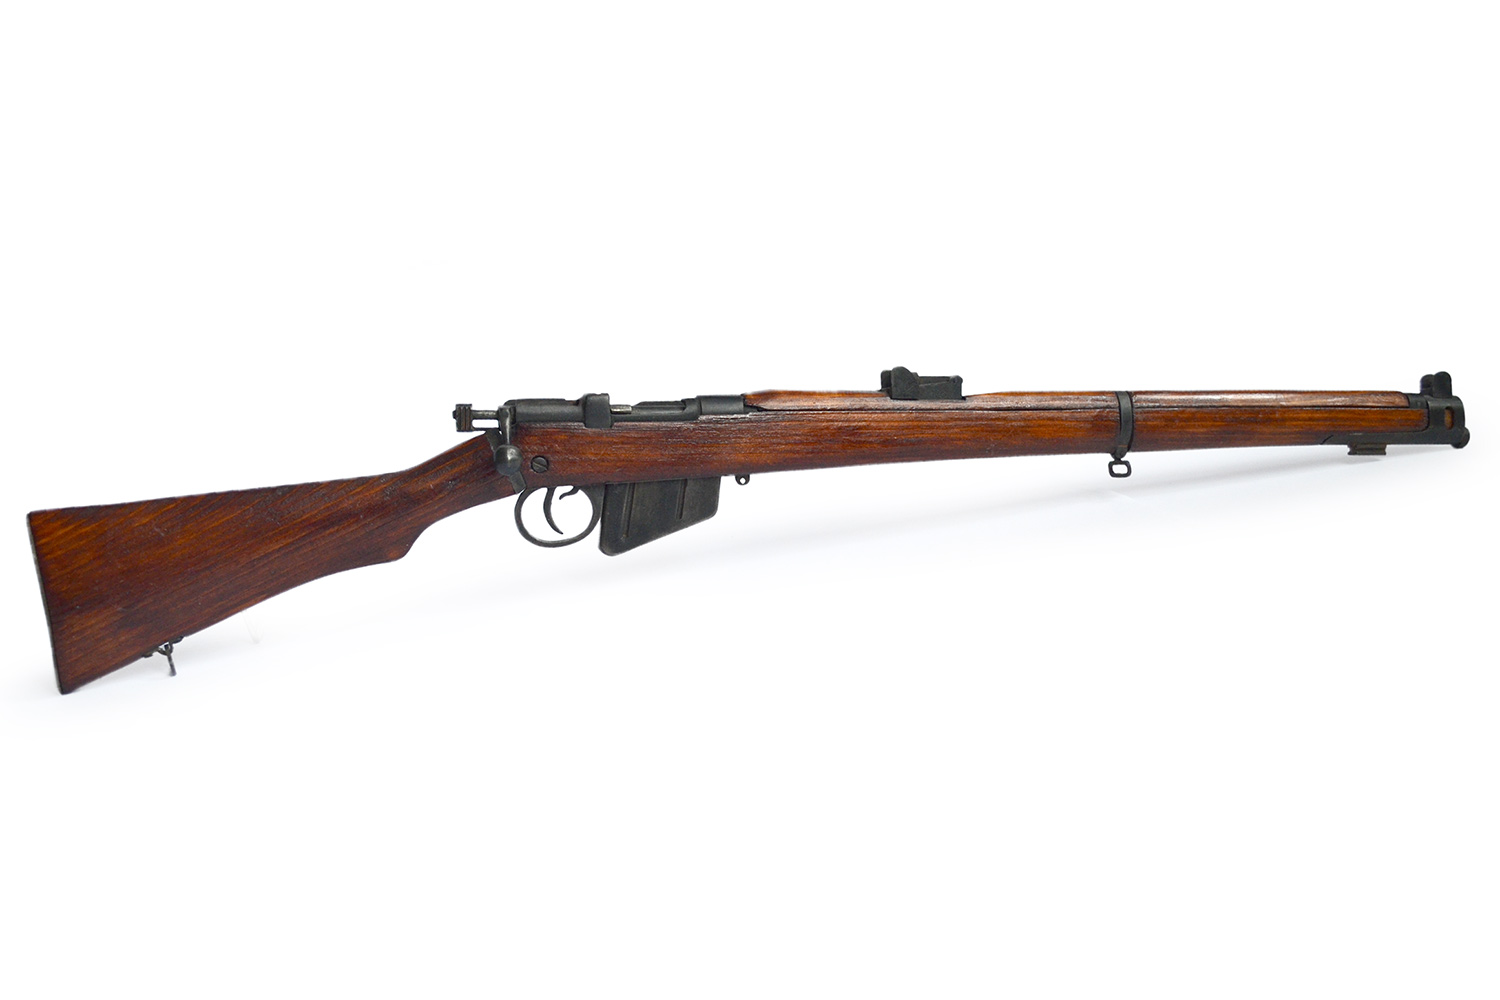 Lee-Enfield No 4 on a scale of 1:3